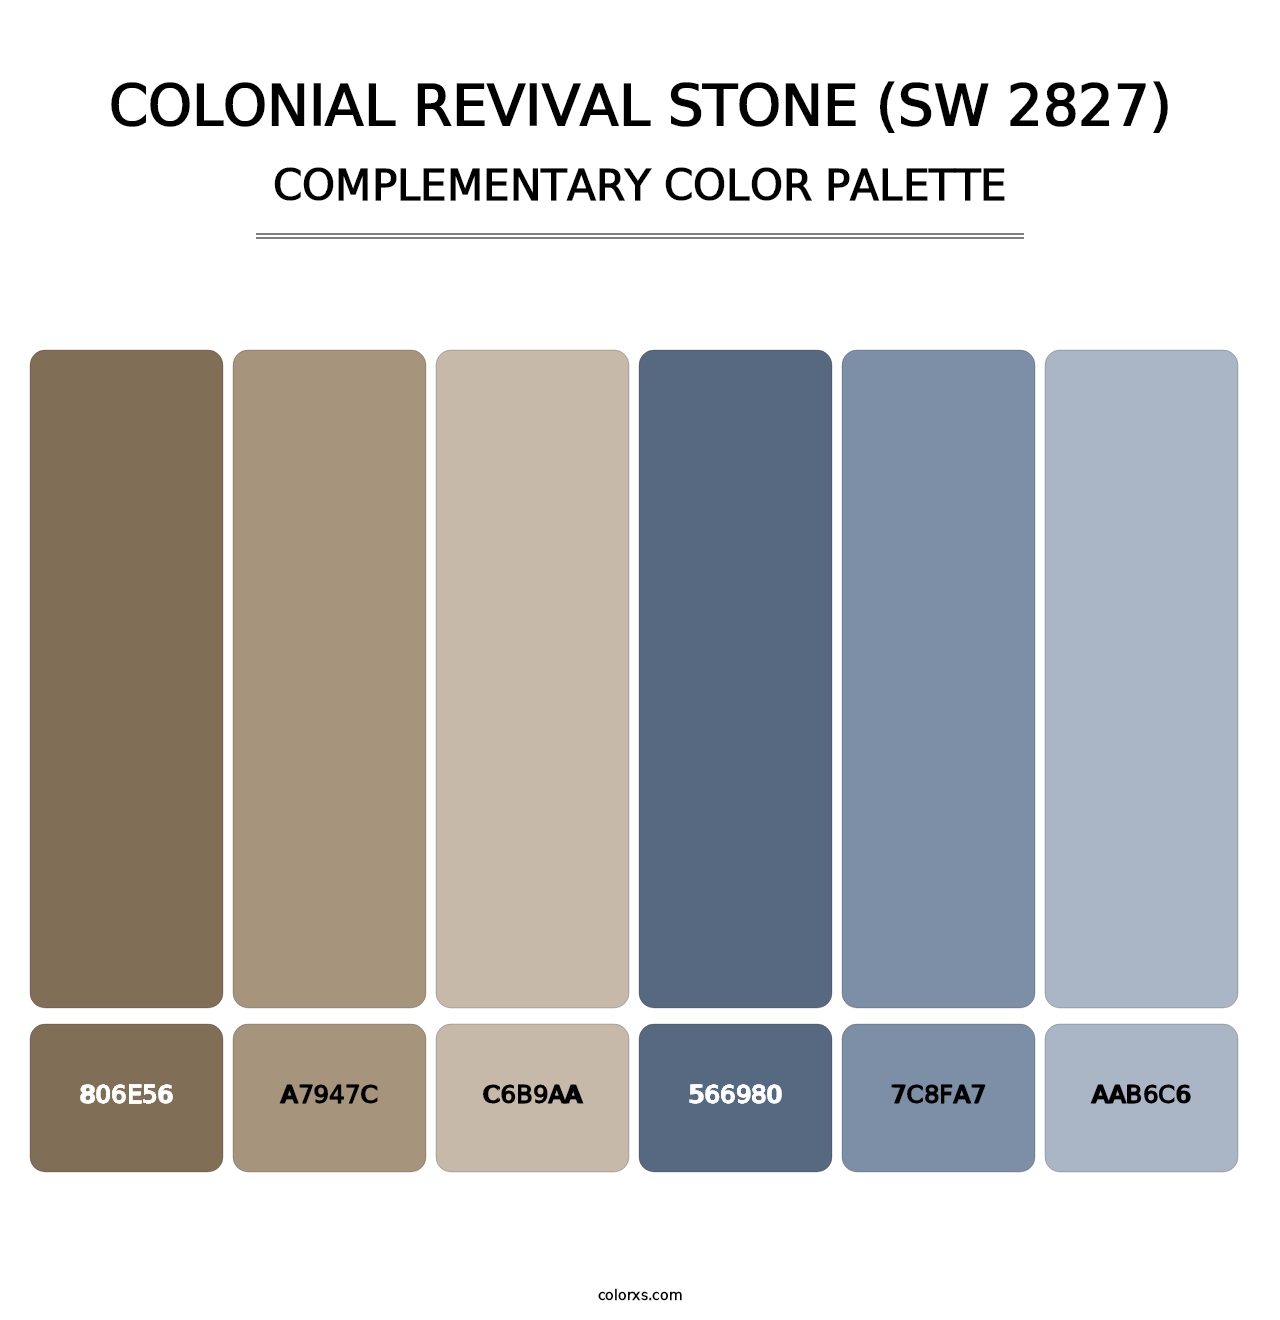 Colonial Revival Stone (SW 2827) - Complementary Color Palette